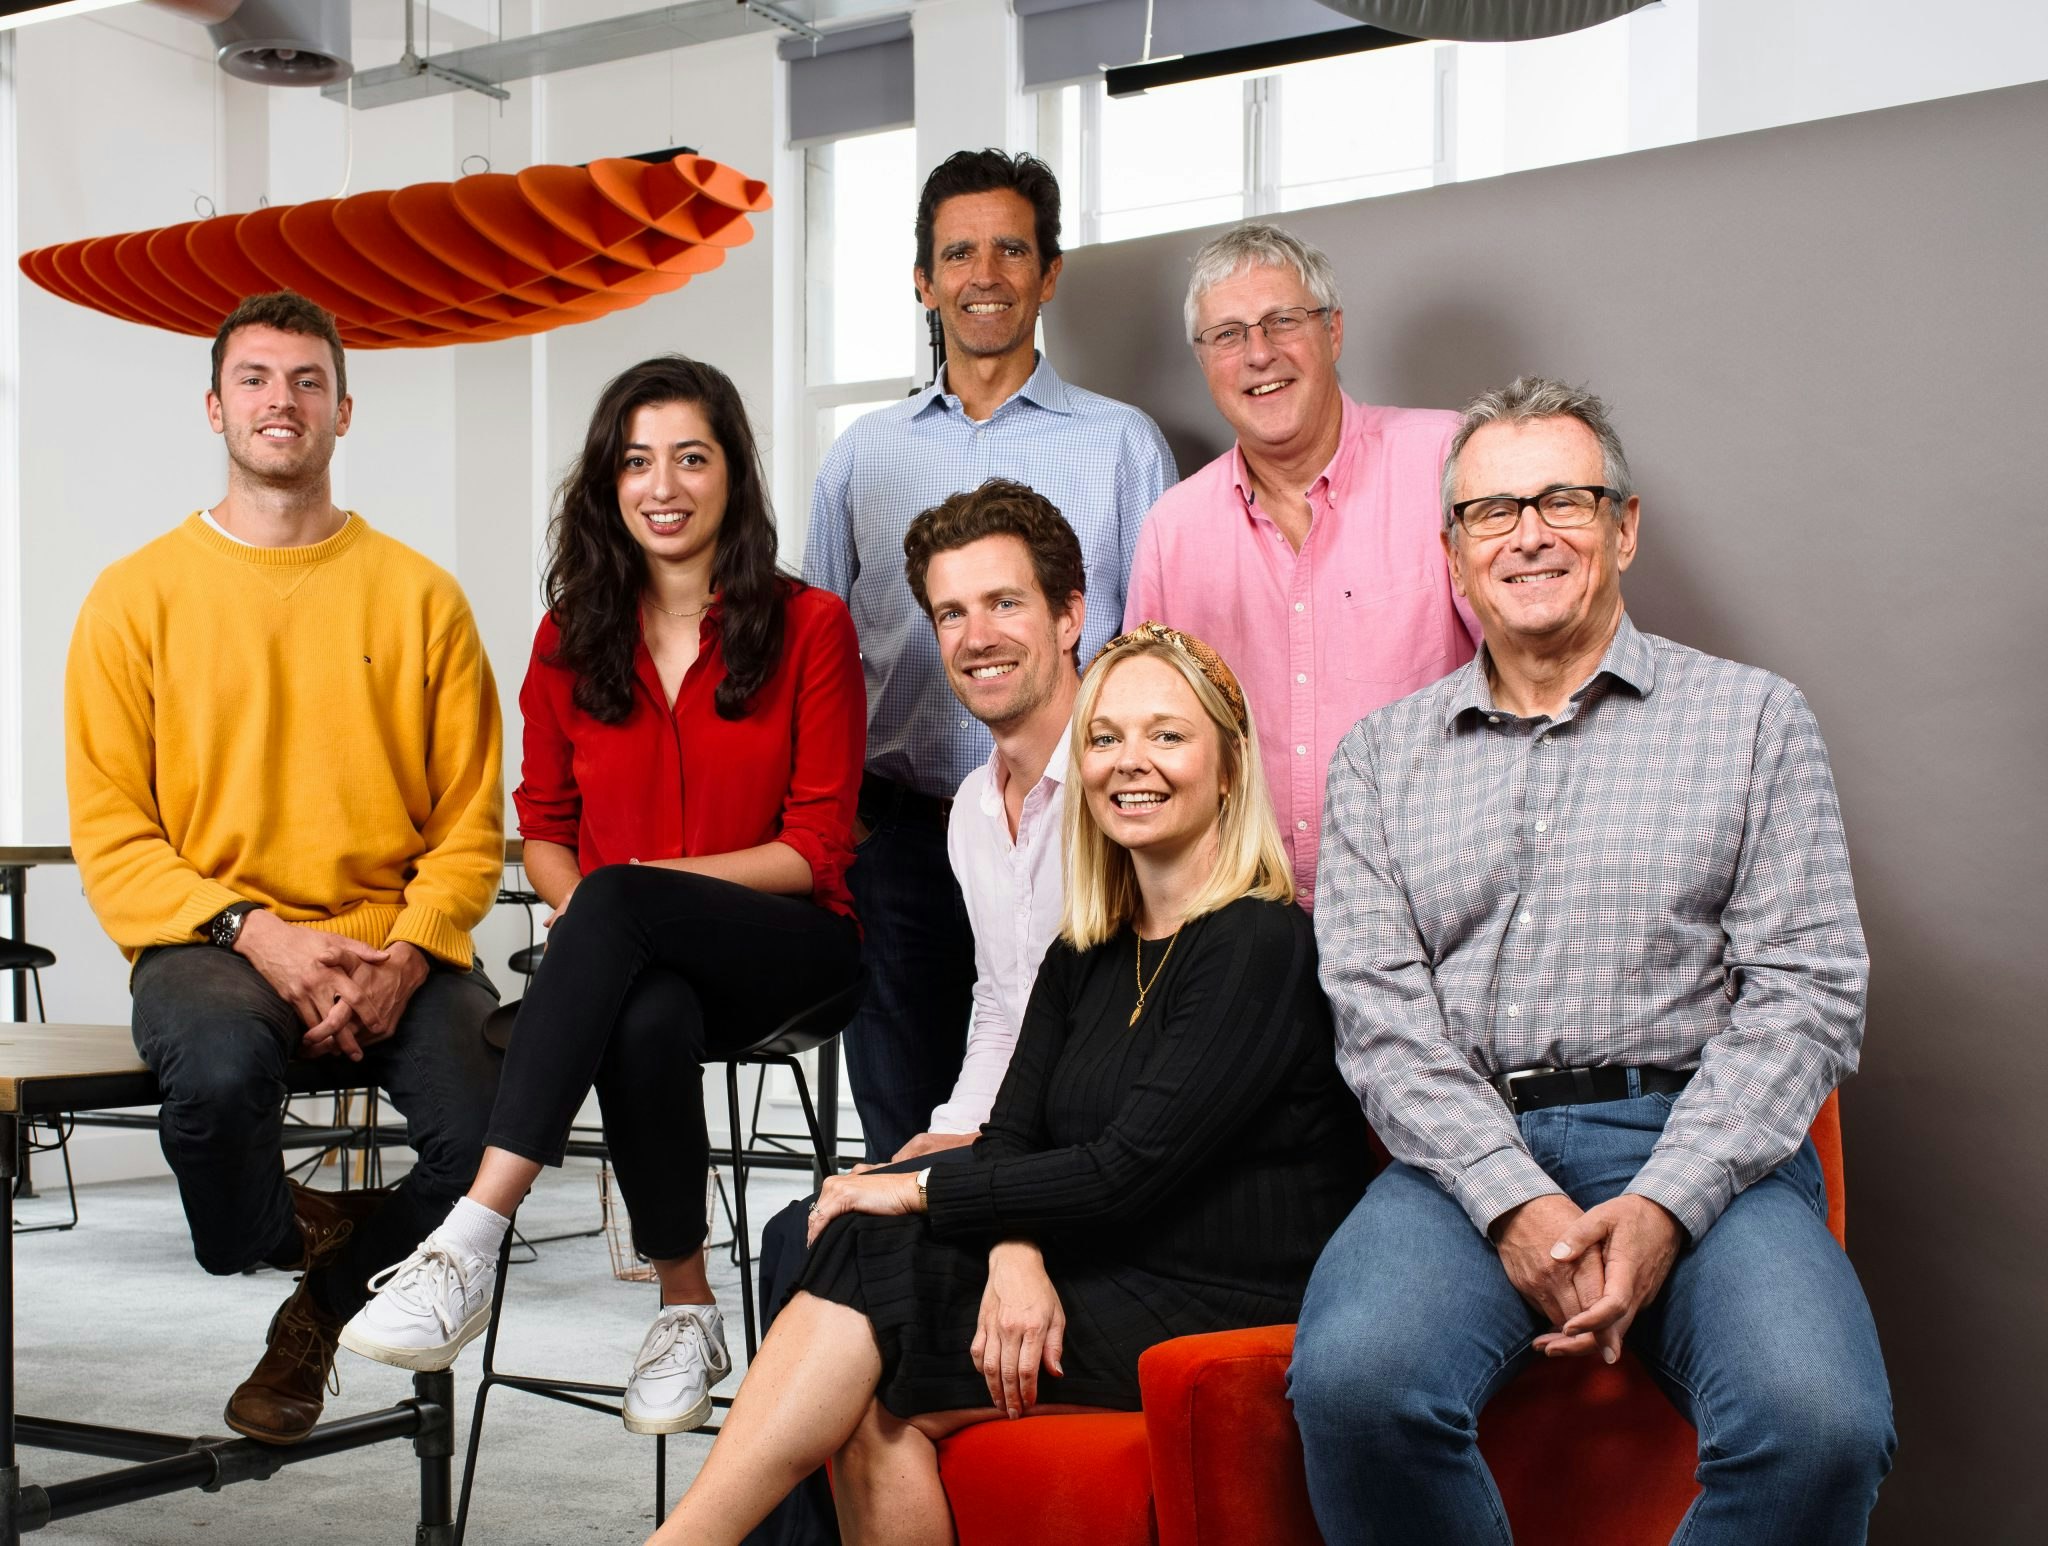 An image of the Episode 1 Ventures team, one of the top seed investors in the UK